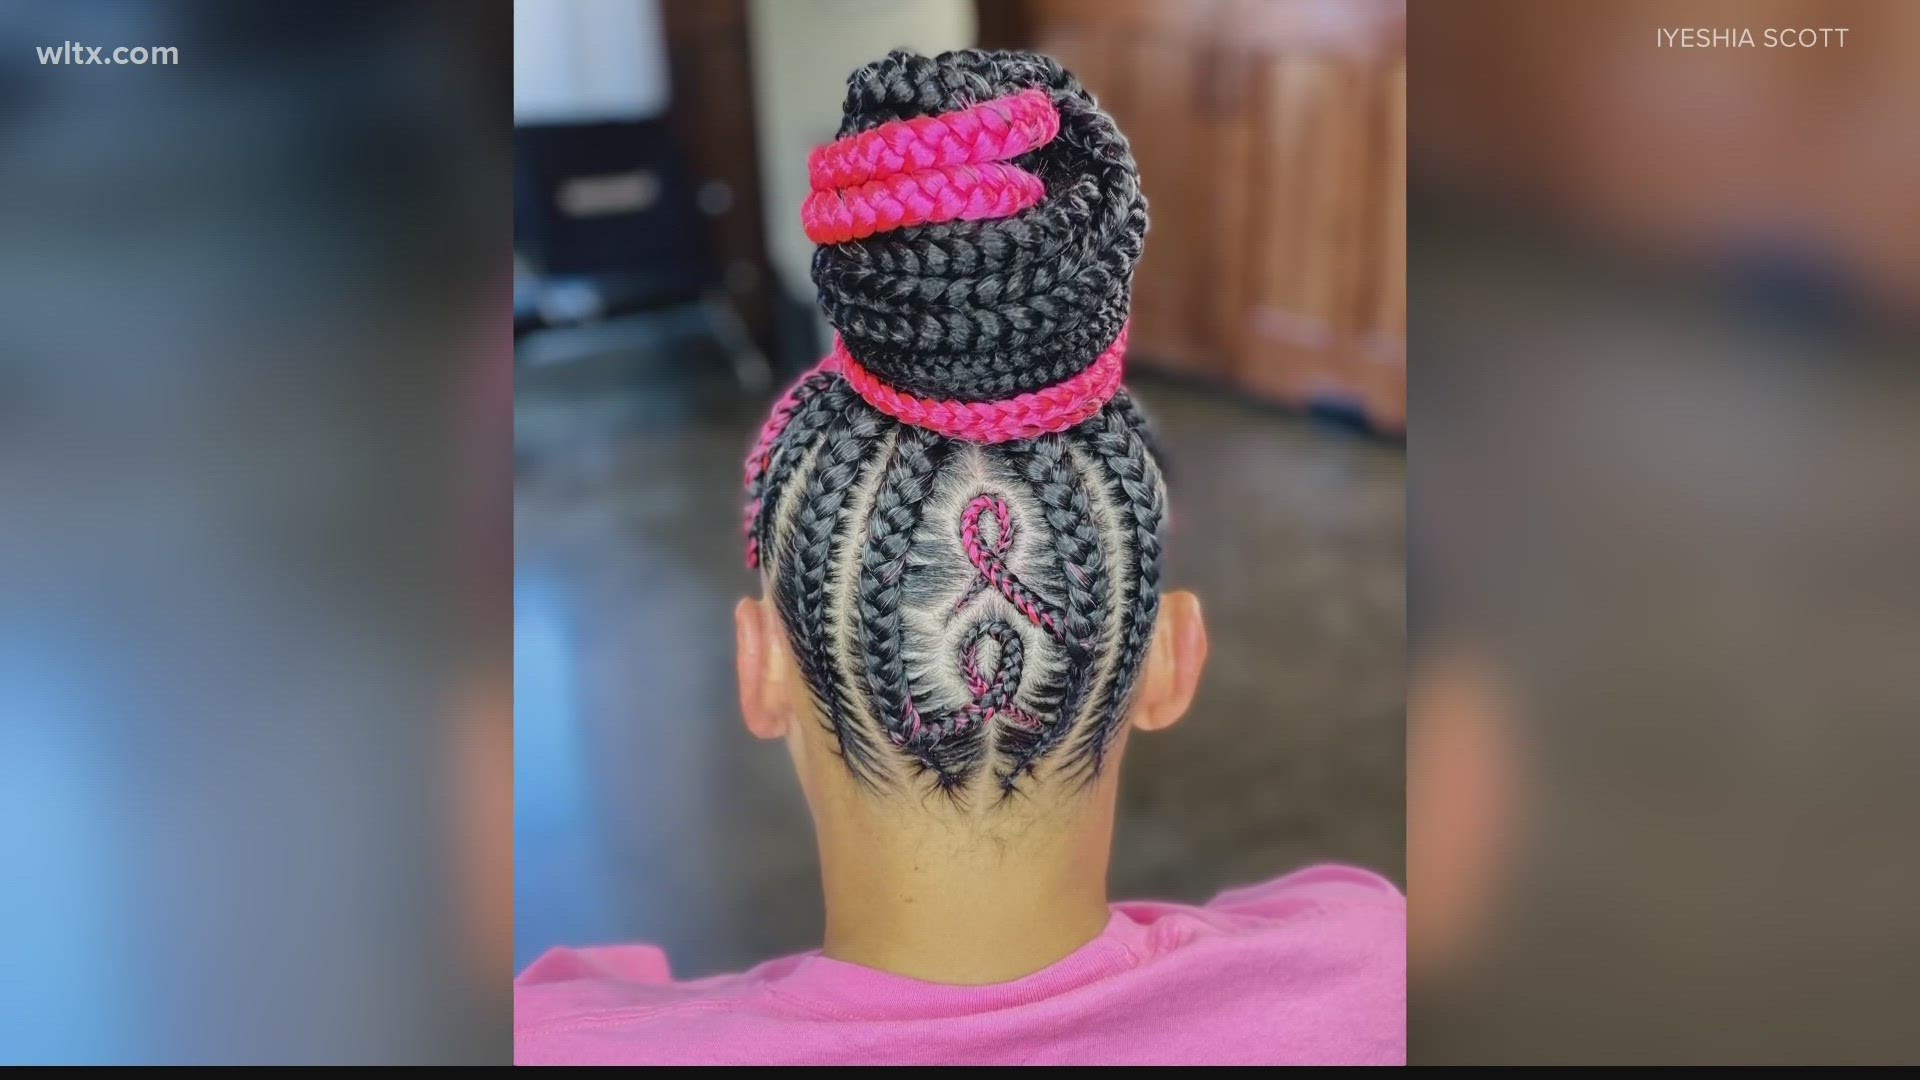 One Sumter woman has been braiding hair and for the last three years styling her client's hair in a way that highlights the pink ribbon.